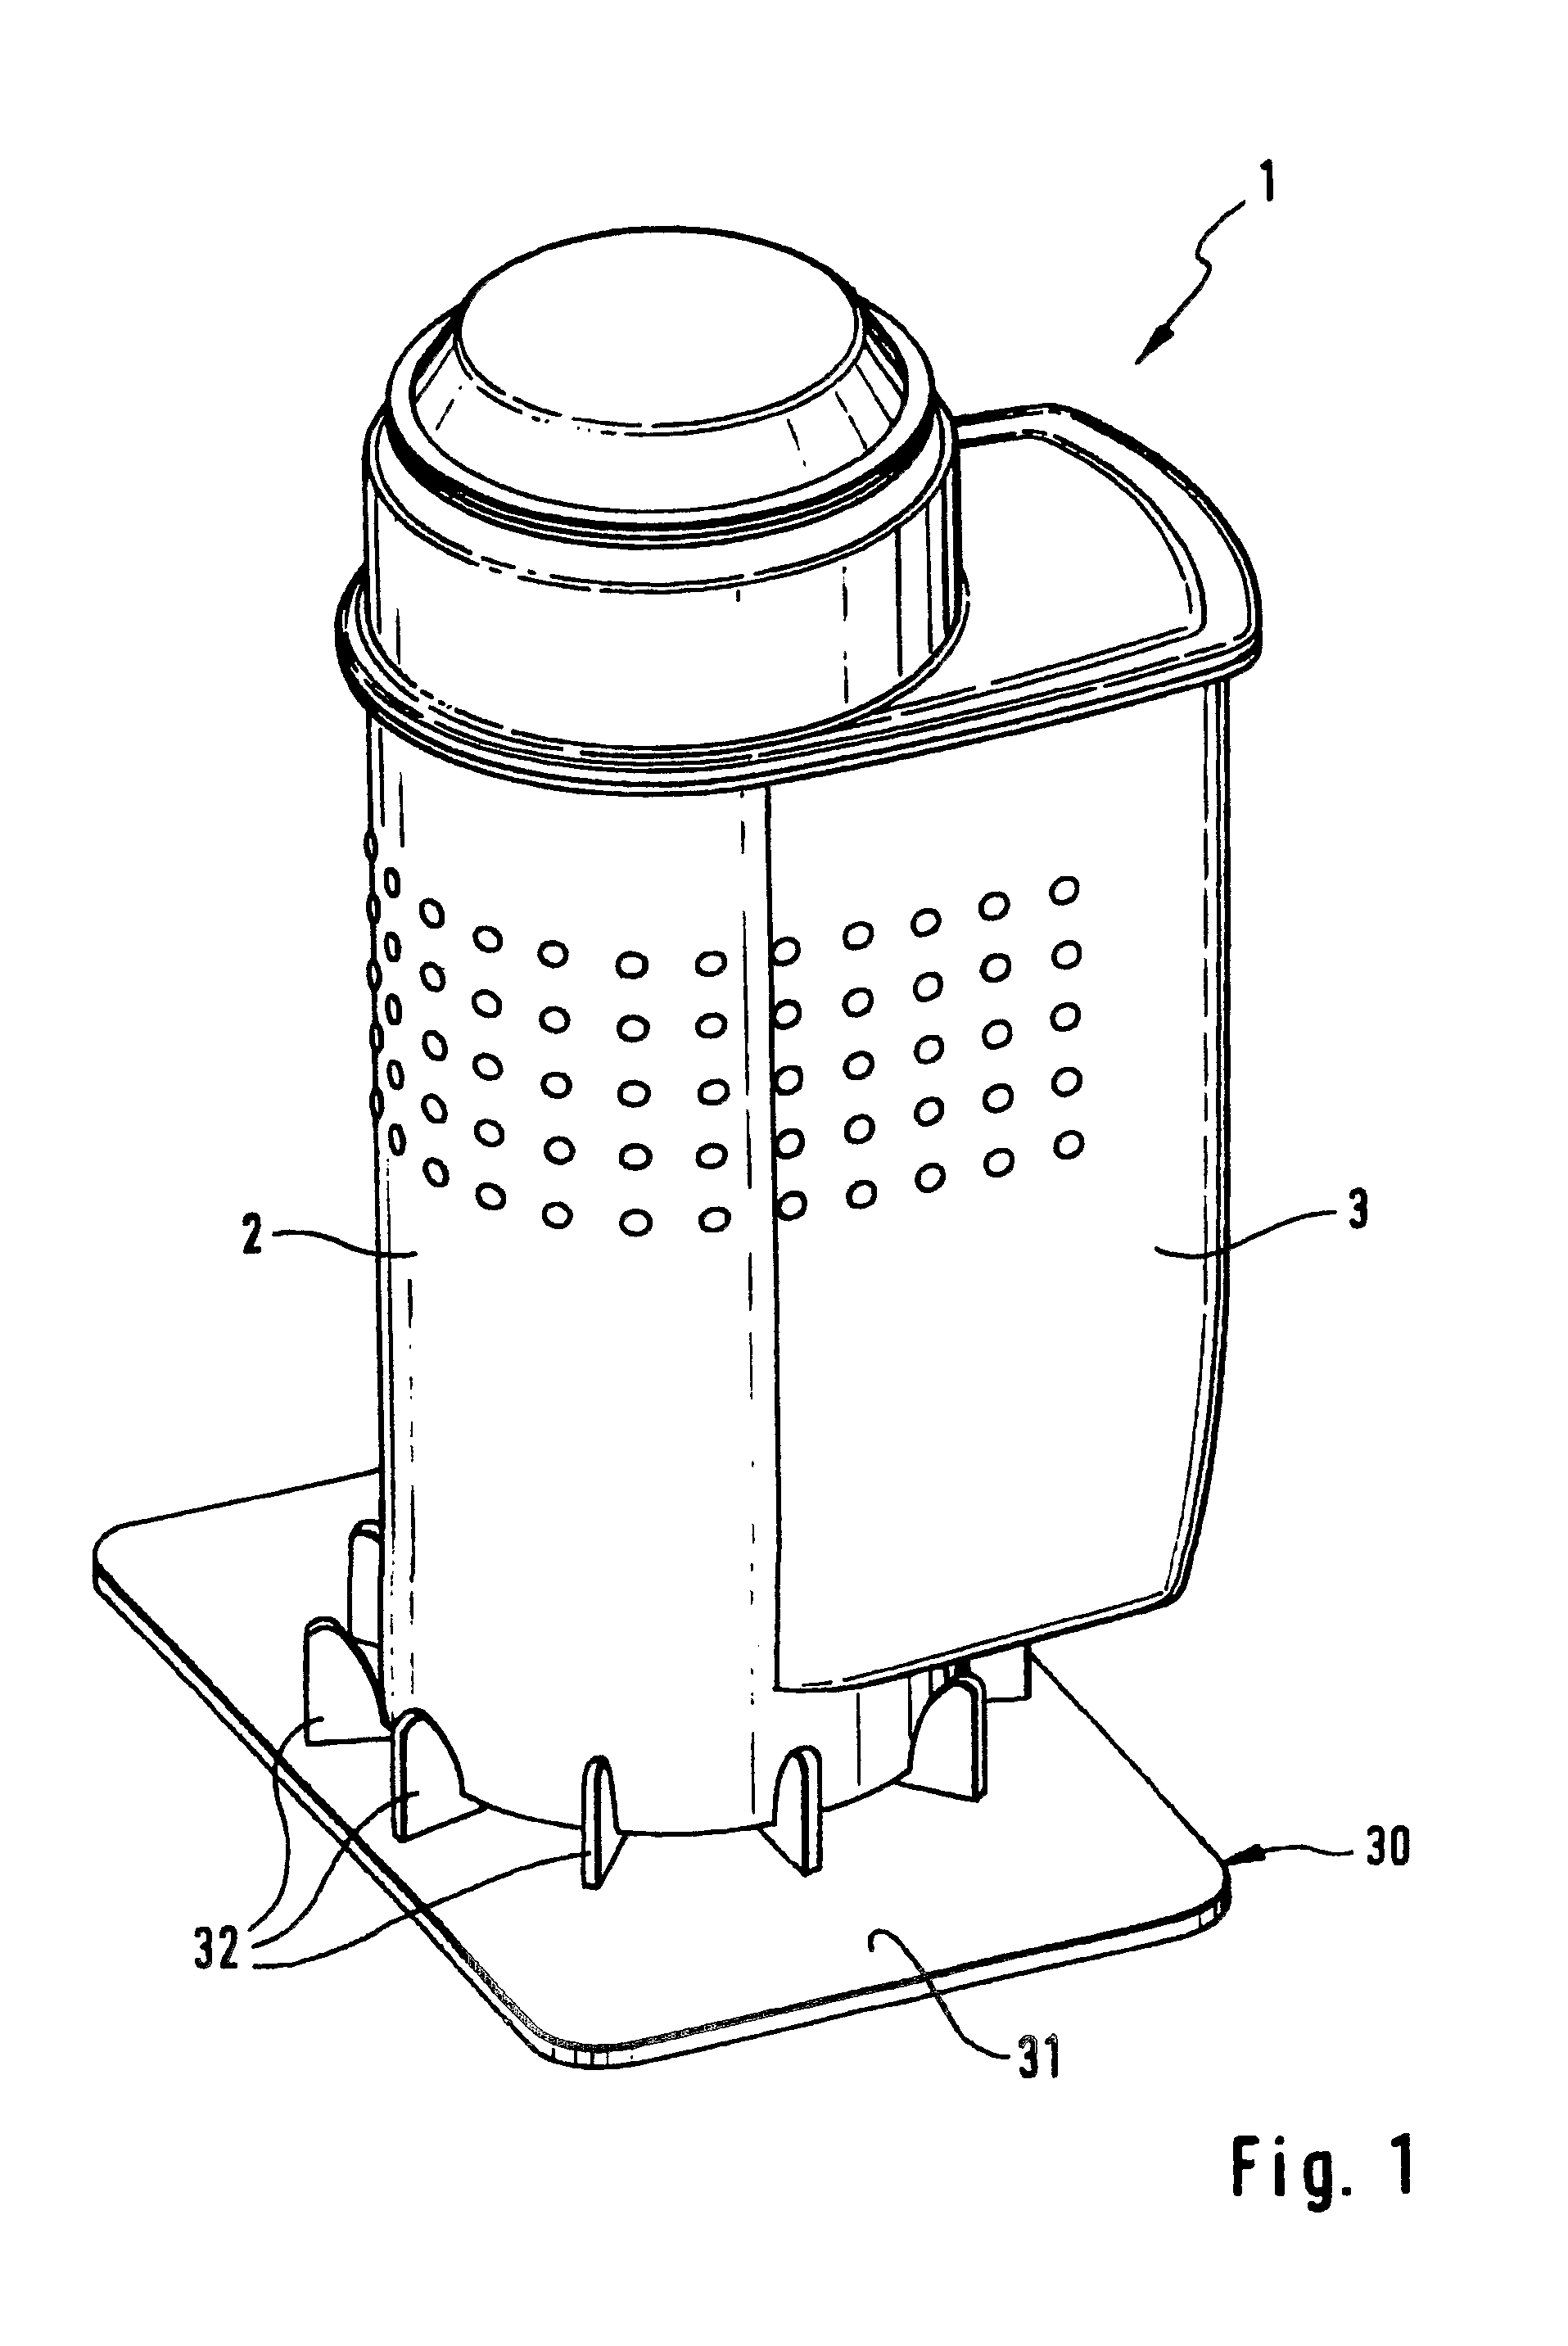 Filter cartridge including a snap-on rim connector